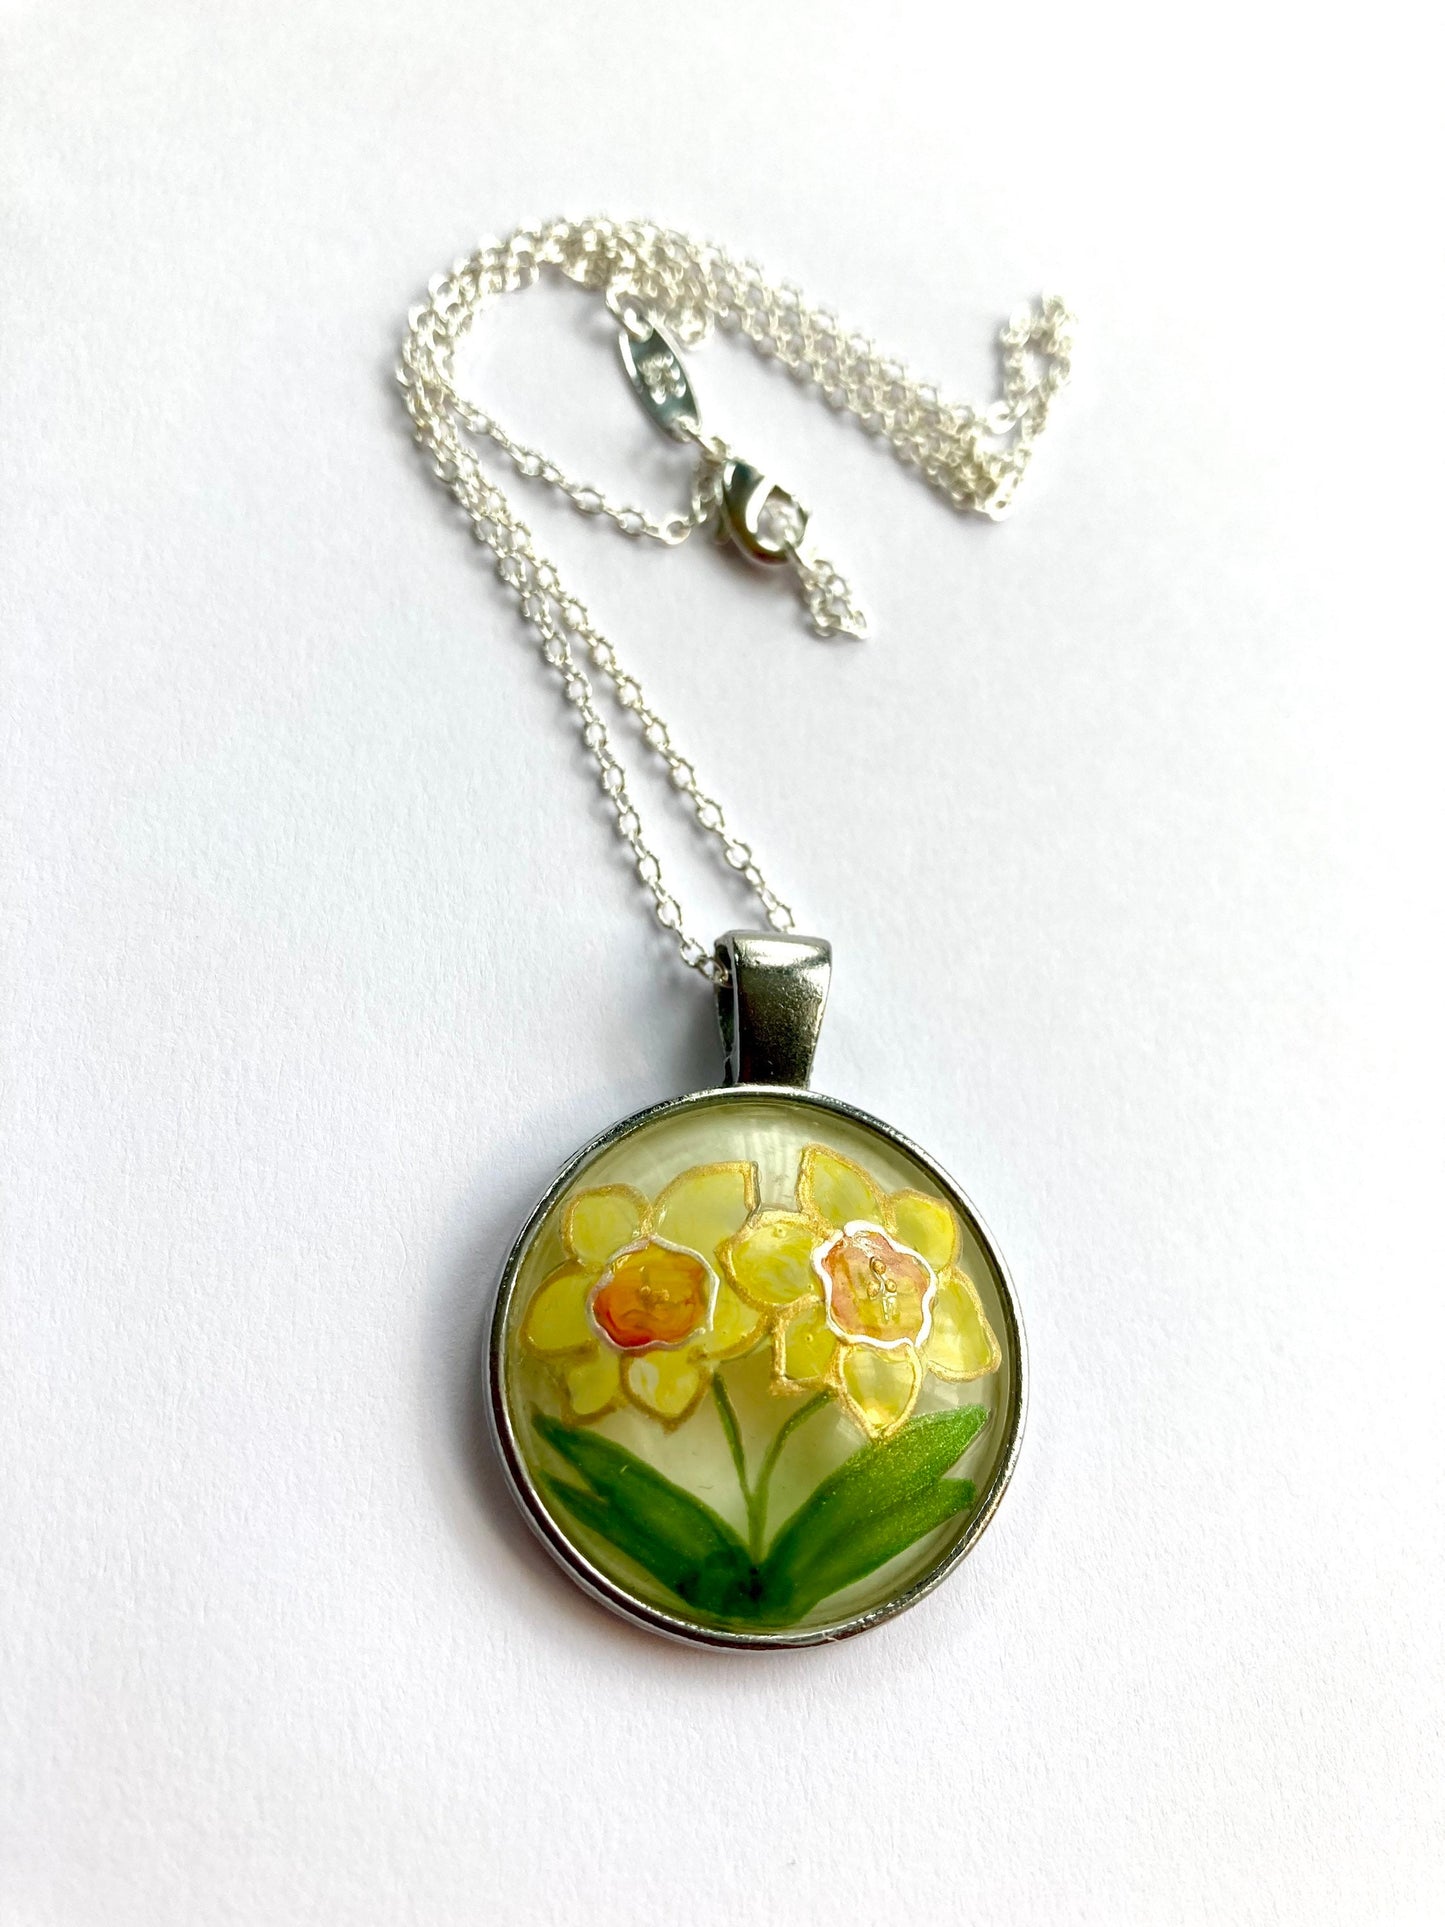 Daffodil design hand painted glass pendant necklace